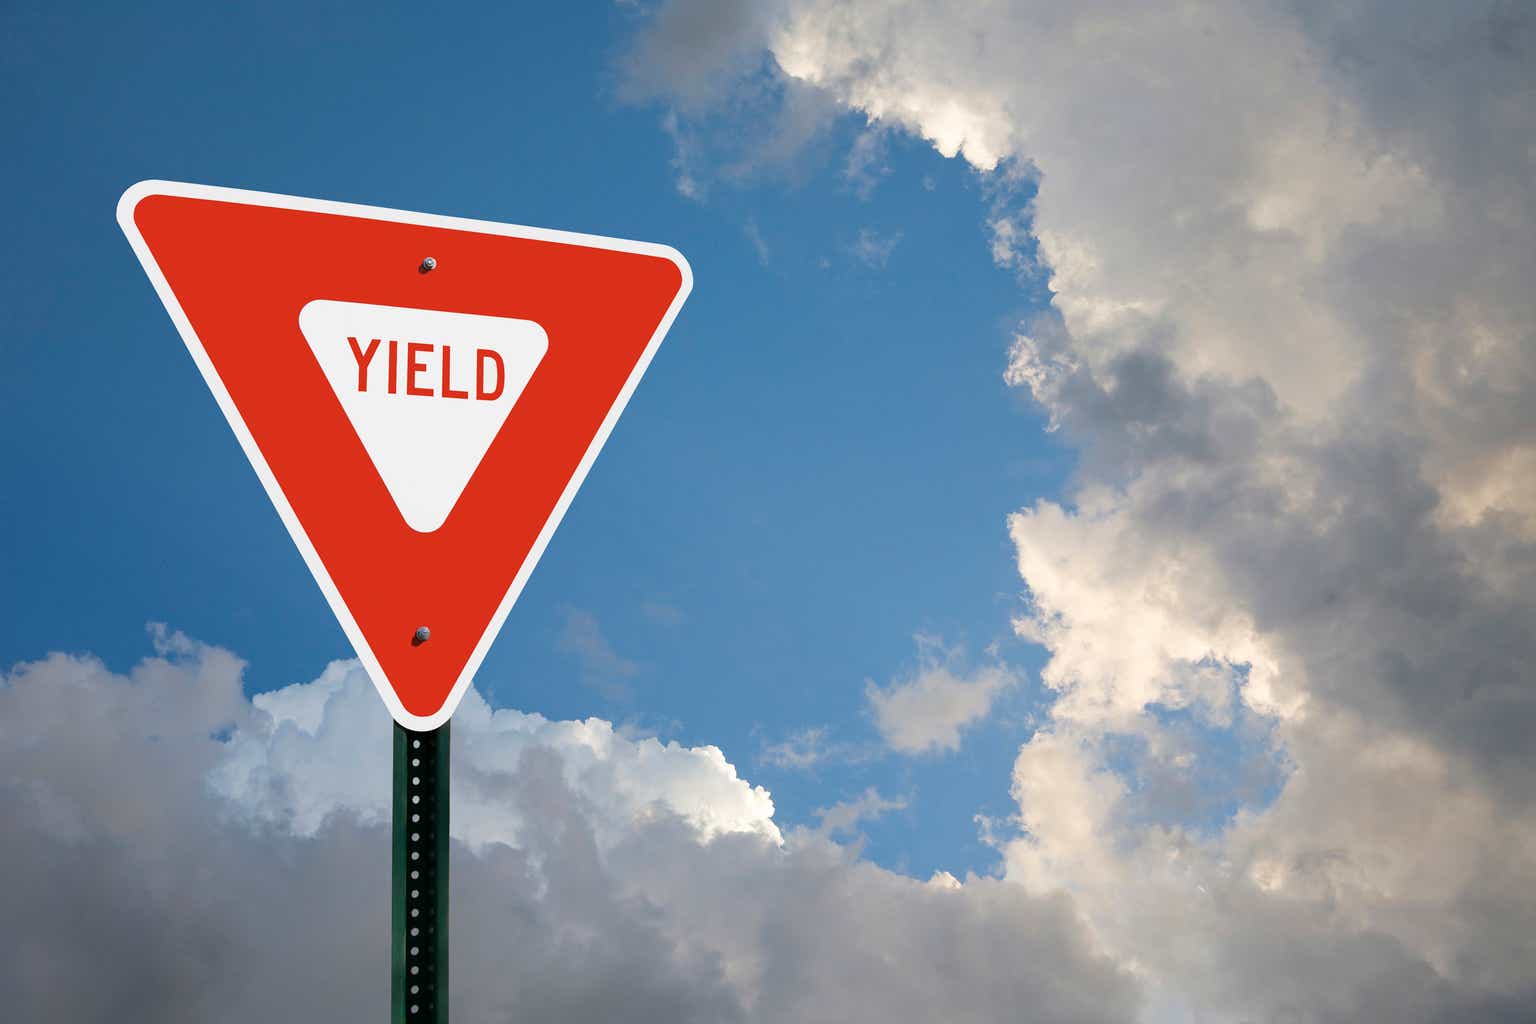 Oxford Lane Capital: High Yield Hides Small Total Returns